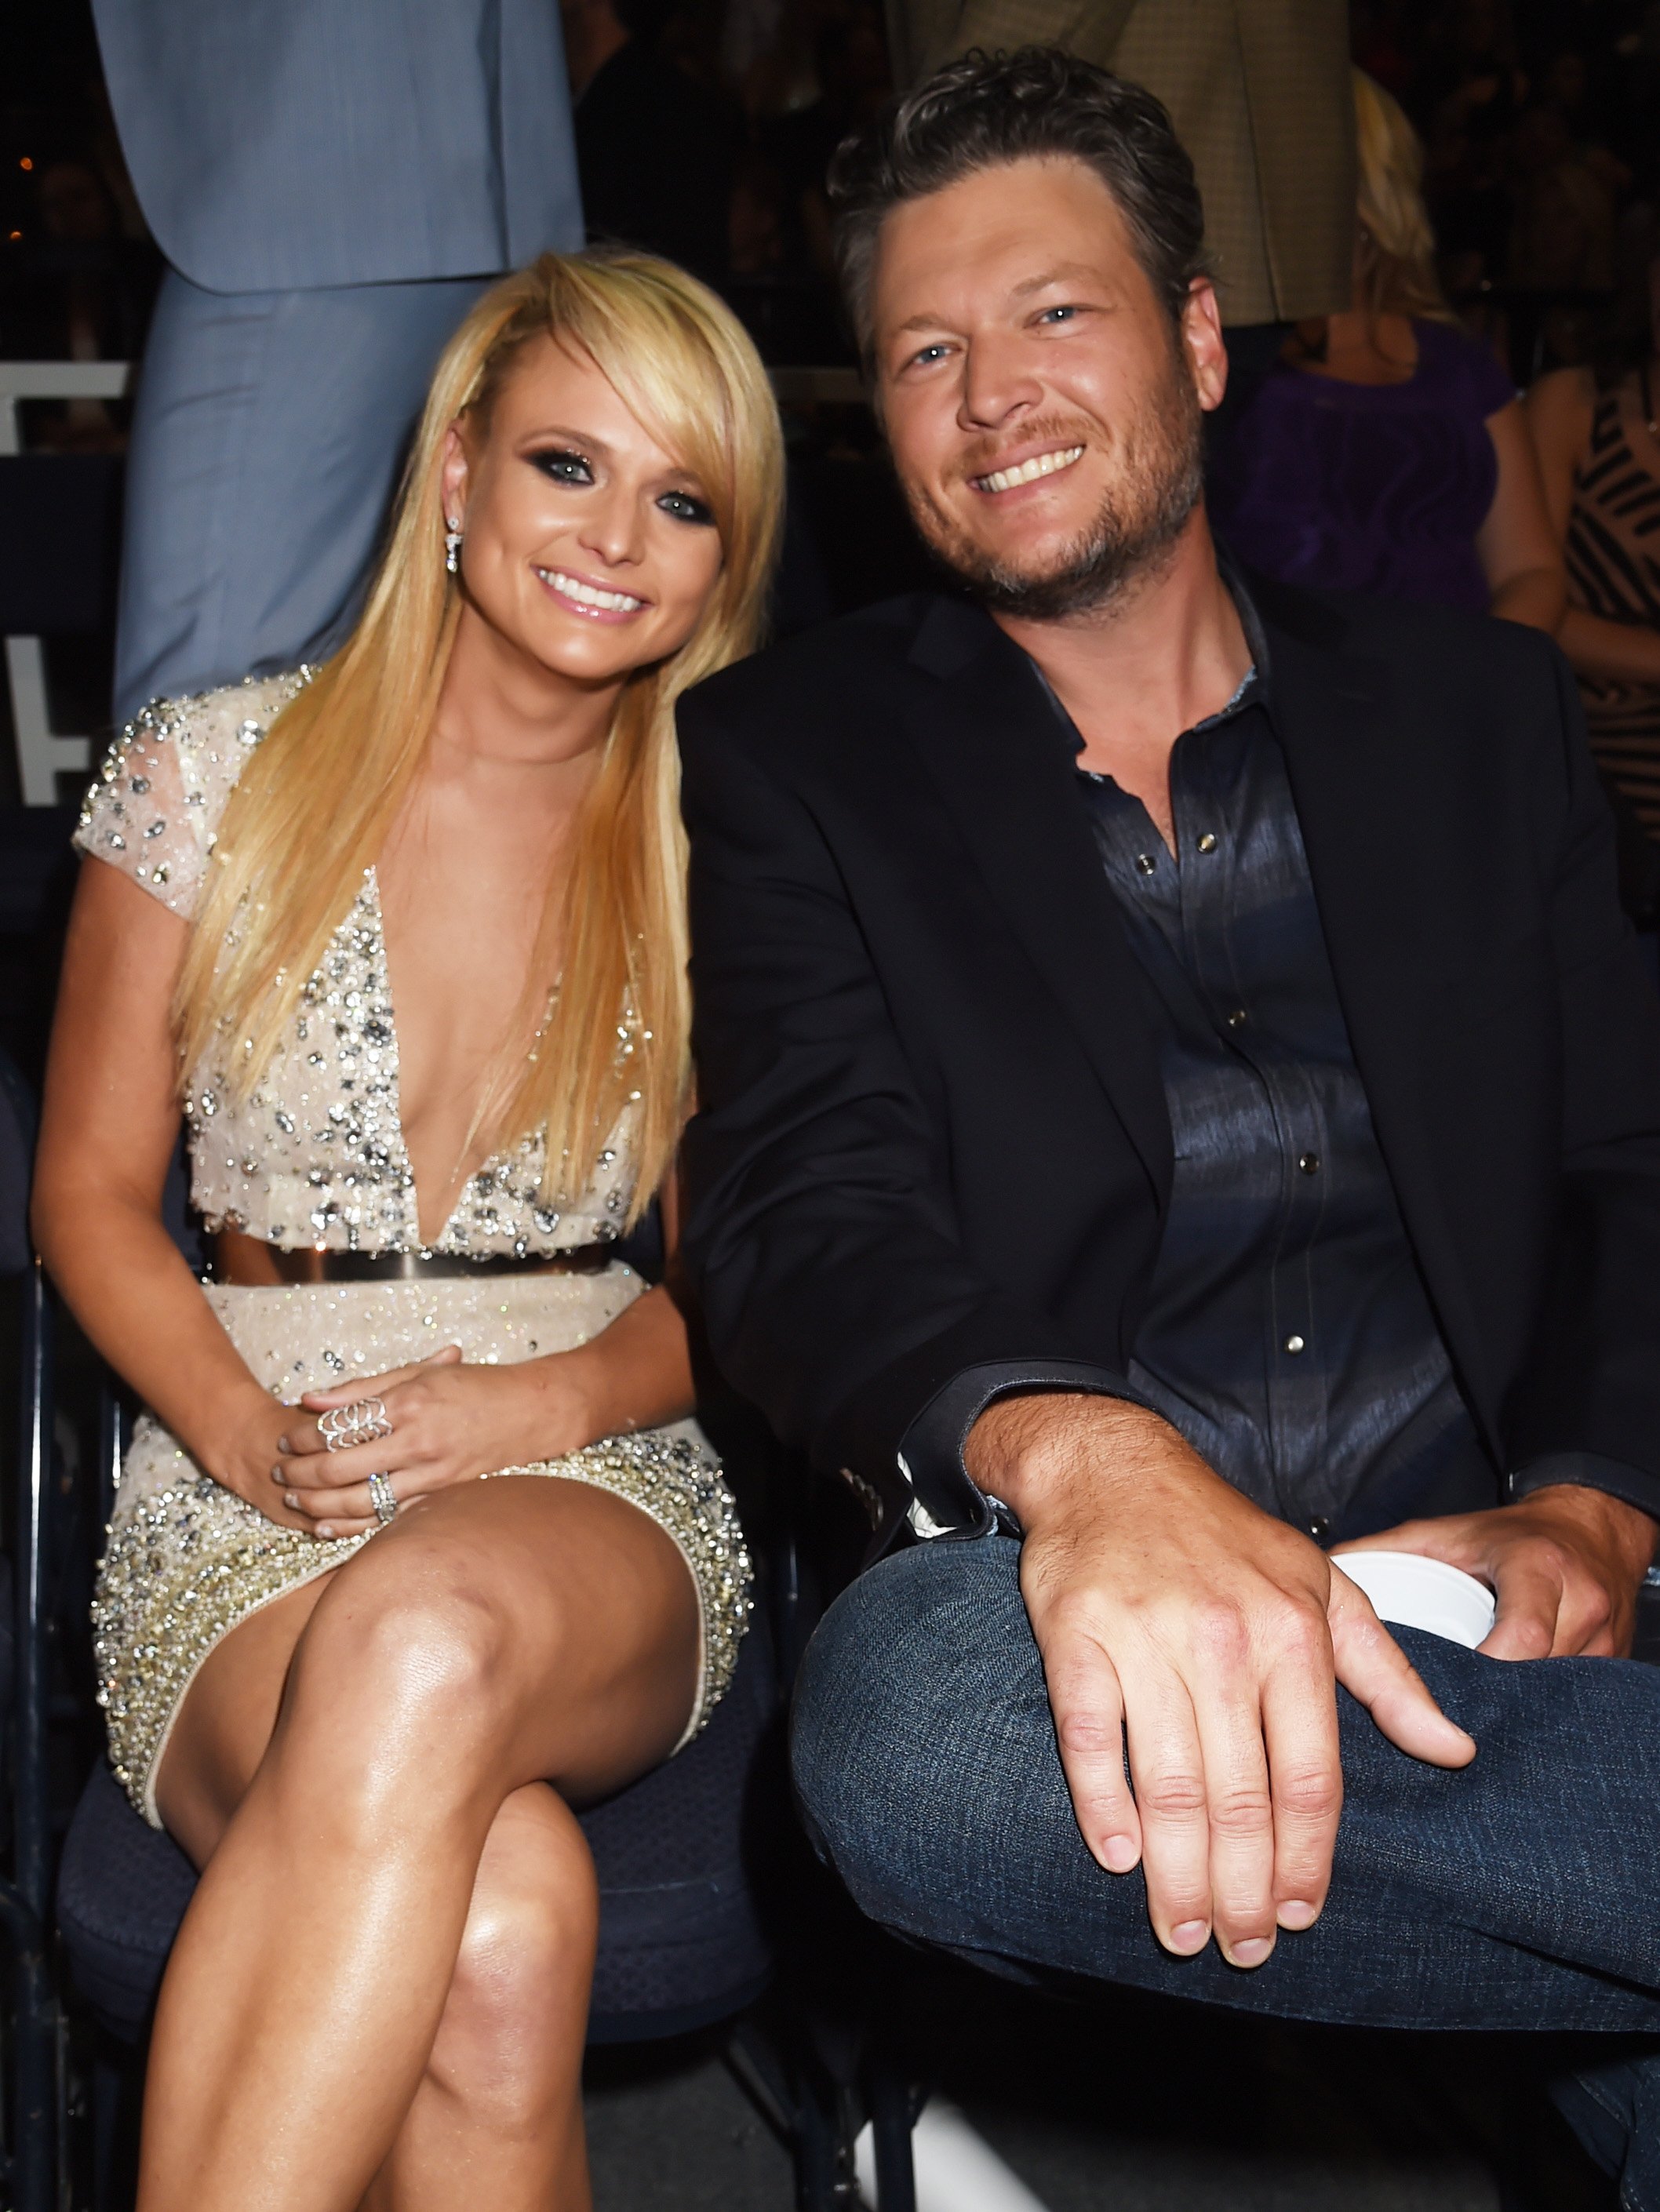 Miranda Lambert and Blake Shelton during the 2014 CMT Music Awards at the Bridgestone Arena on June 4, 2014 in Nashville, Tennessee. | Source: Getty Images